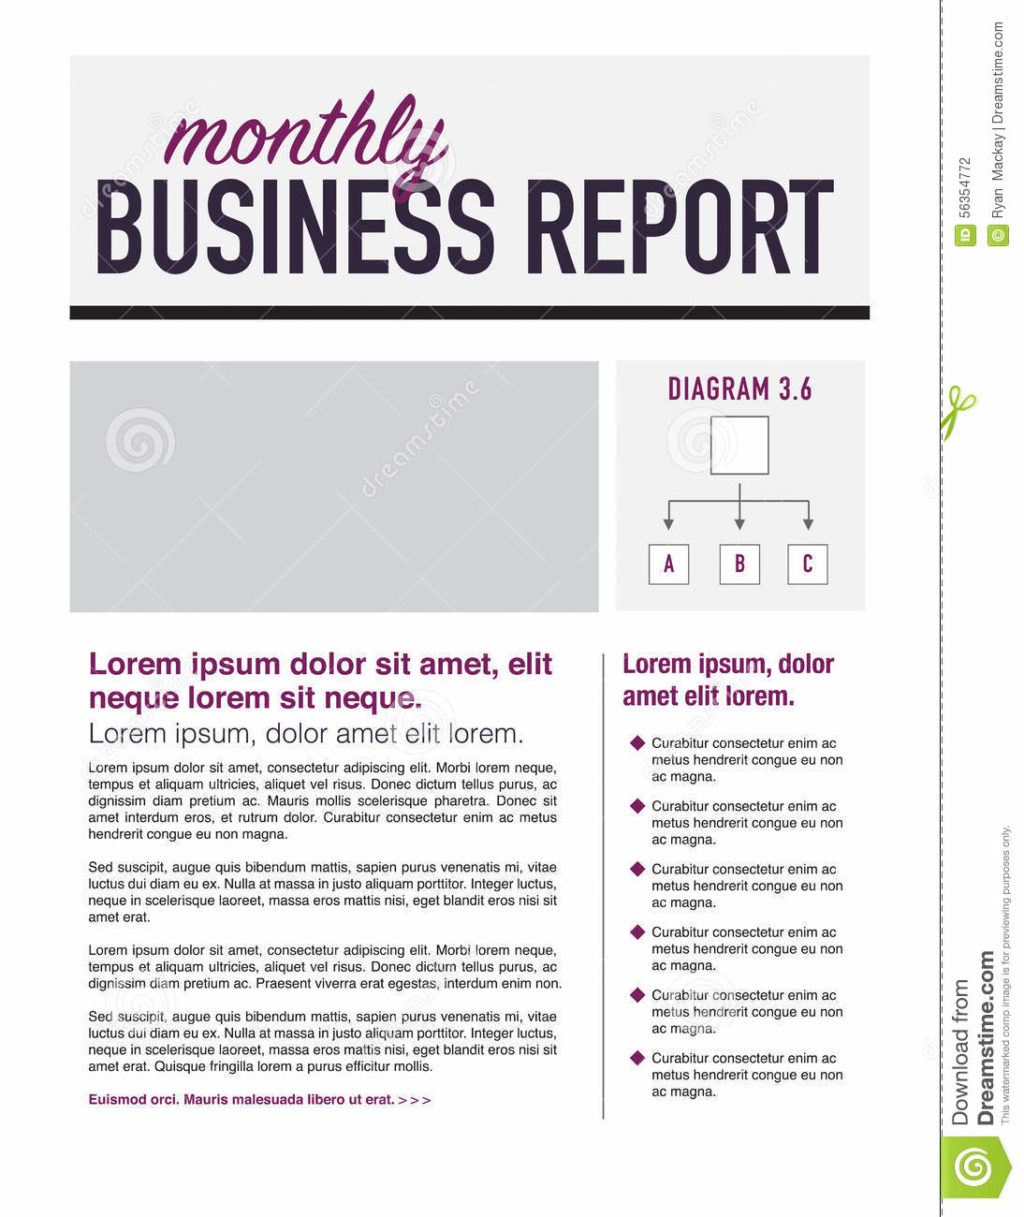 business-report-page-layout-newsletter-use-nonprofit-56354772